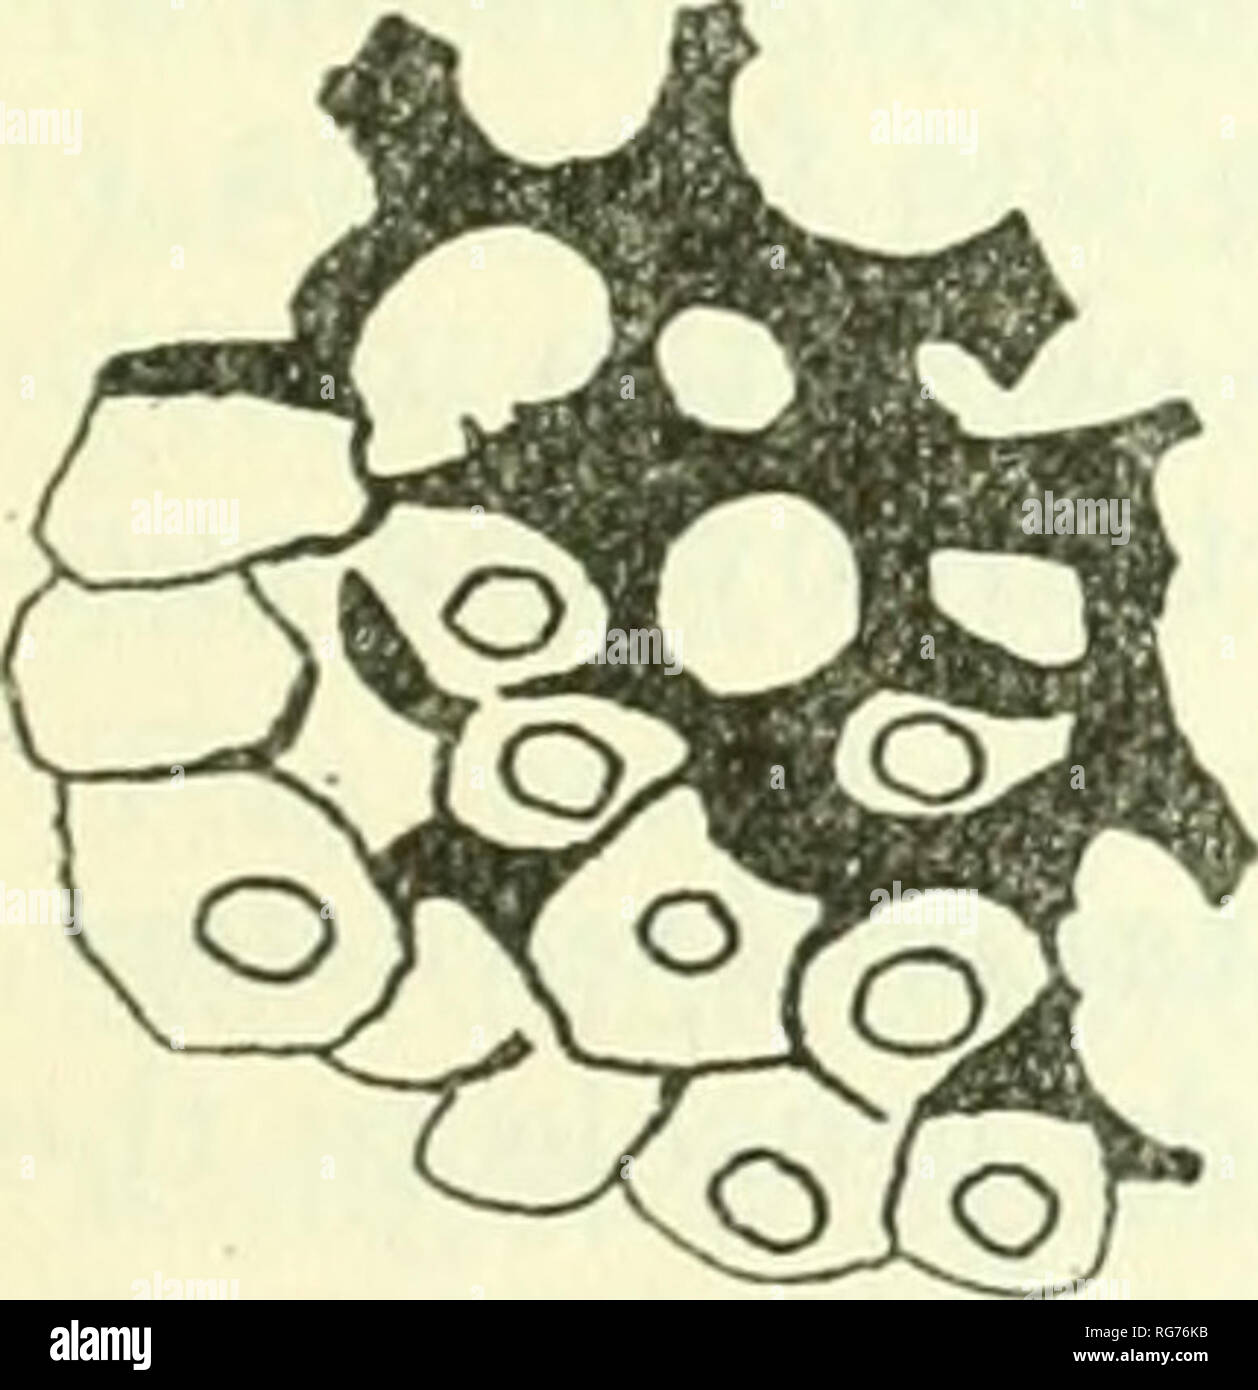 . Bulletin - United States National Museum. Science. vol. 2, pt. 2.] A TAXONOMIC STUDY OF THE SALPIDAE METCALF. 11 series of increasingly developed eyes. The character of the rod cells in the imperfect eyes of the more aberrant Salpidae seems clearly to indicate degeneration. A typical rod cell from any well-developed Salpa eye would be about as shown in figure 1. Compare this with a group of rod cells from, say, Pegea confed erata (fig. 2). In the former the glassy mod- ification of the protoplasm, which constitutes the &quot;rod&quot; (represented in black in the figures), is regular and is  Stock Photo